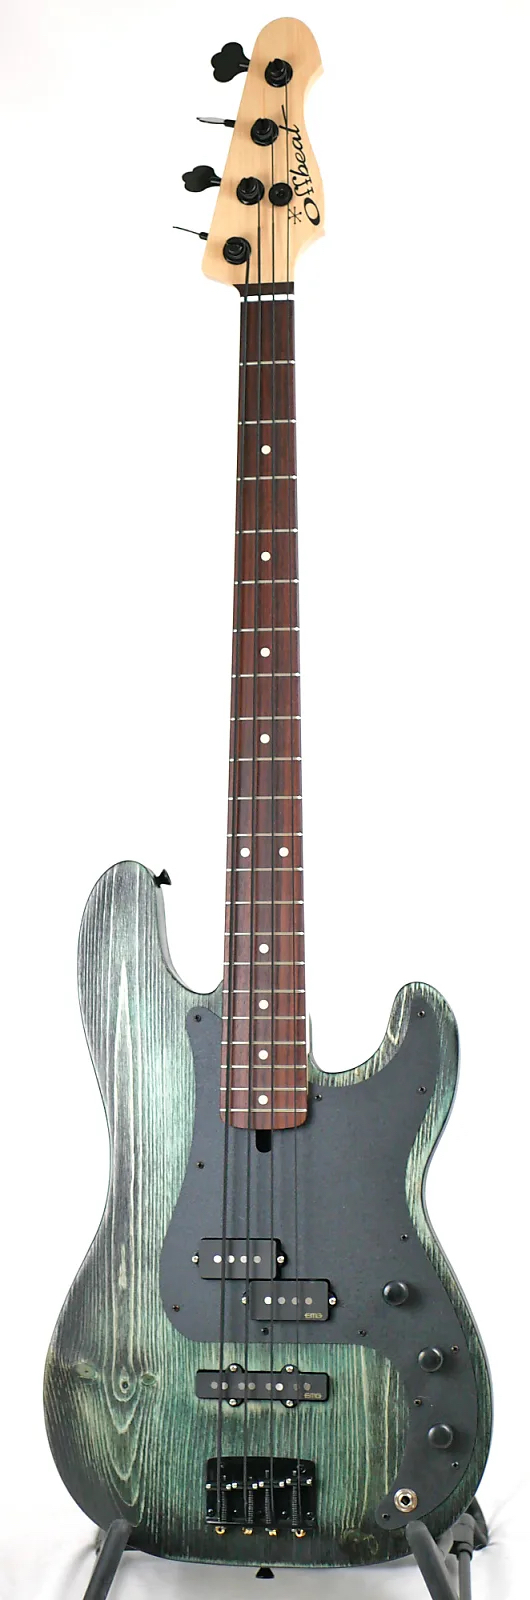 Full length image of the front of a Pamela PJ 34-Inch Long-Scale Bass in Teal Glow on Distressed Pine with EMG Geezer Butler PJ Pickups